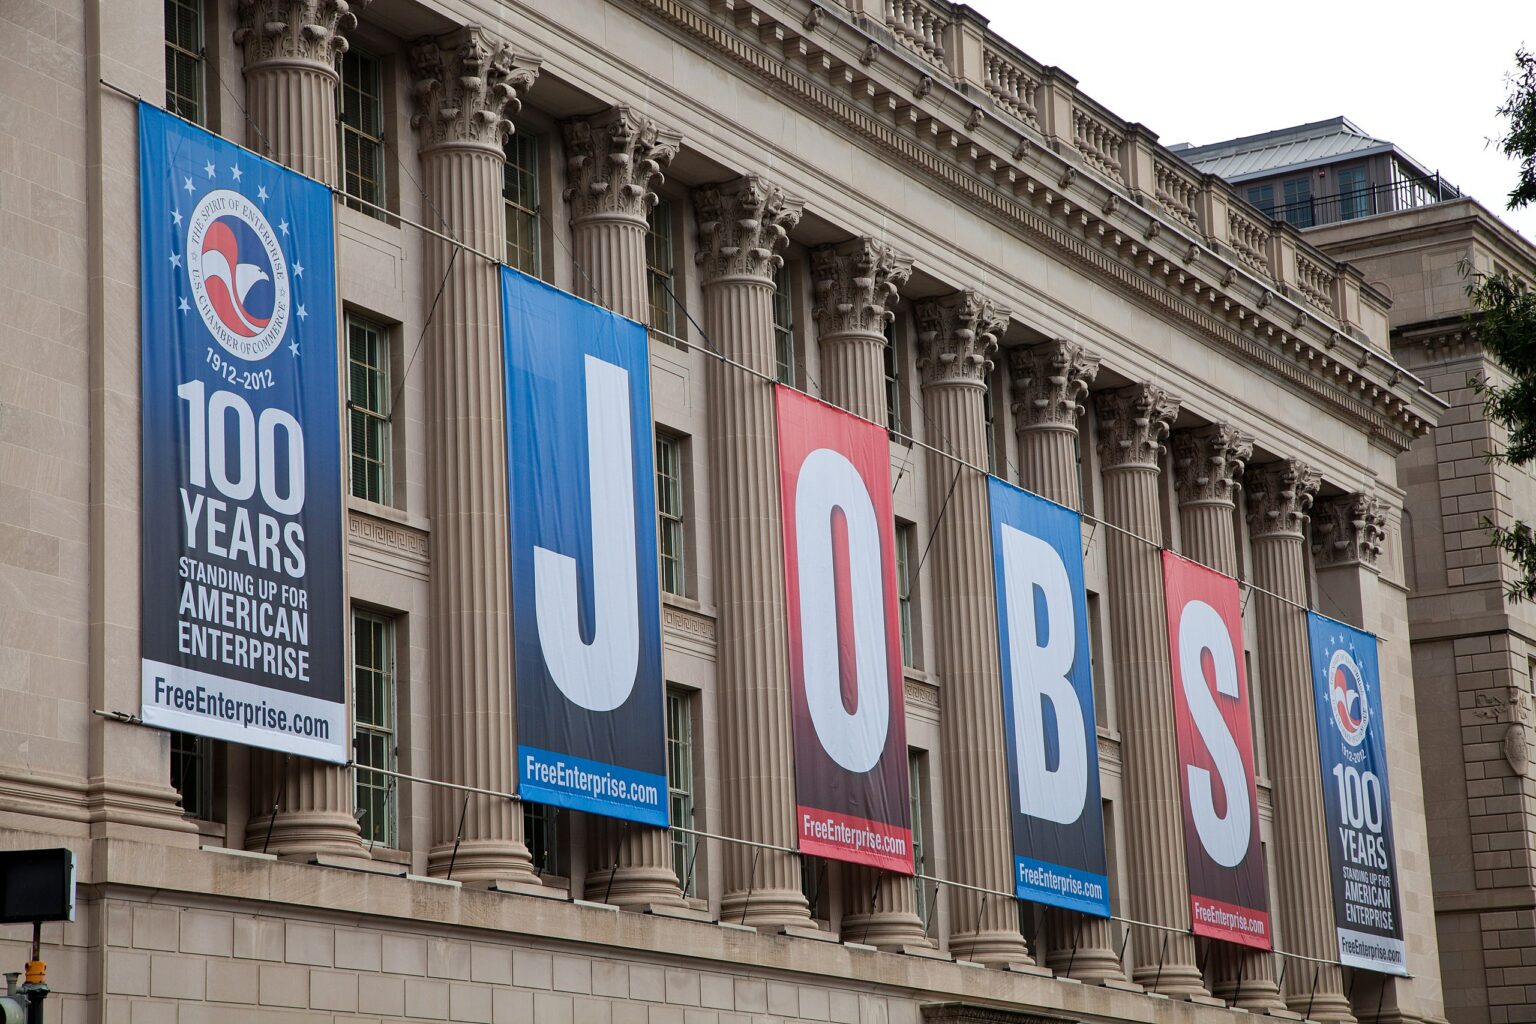 U.S. Chamber of Commerce building with Roman columns and white stone building facade with alternating red and blue banners spelling 'JOBS' and promoting 'American Enterprise'